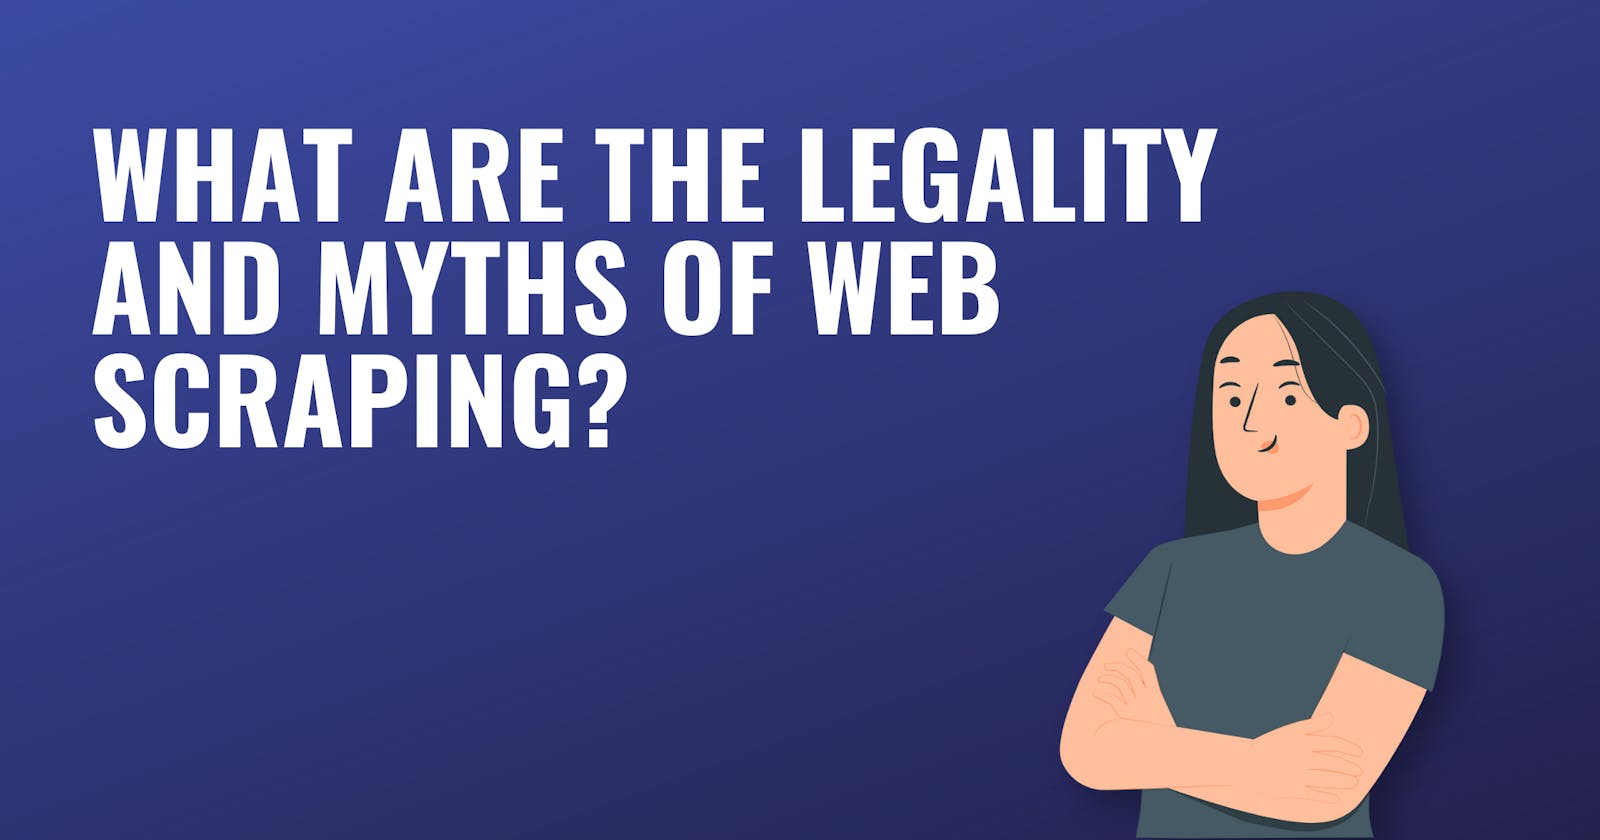 What are the legality and myths of web scraping?